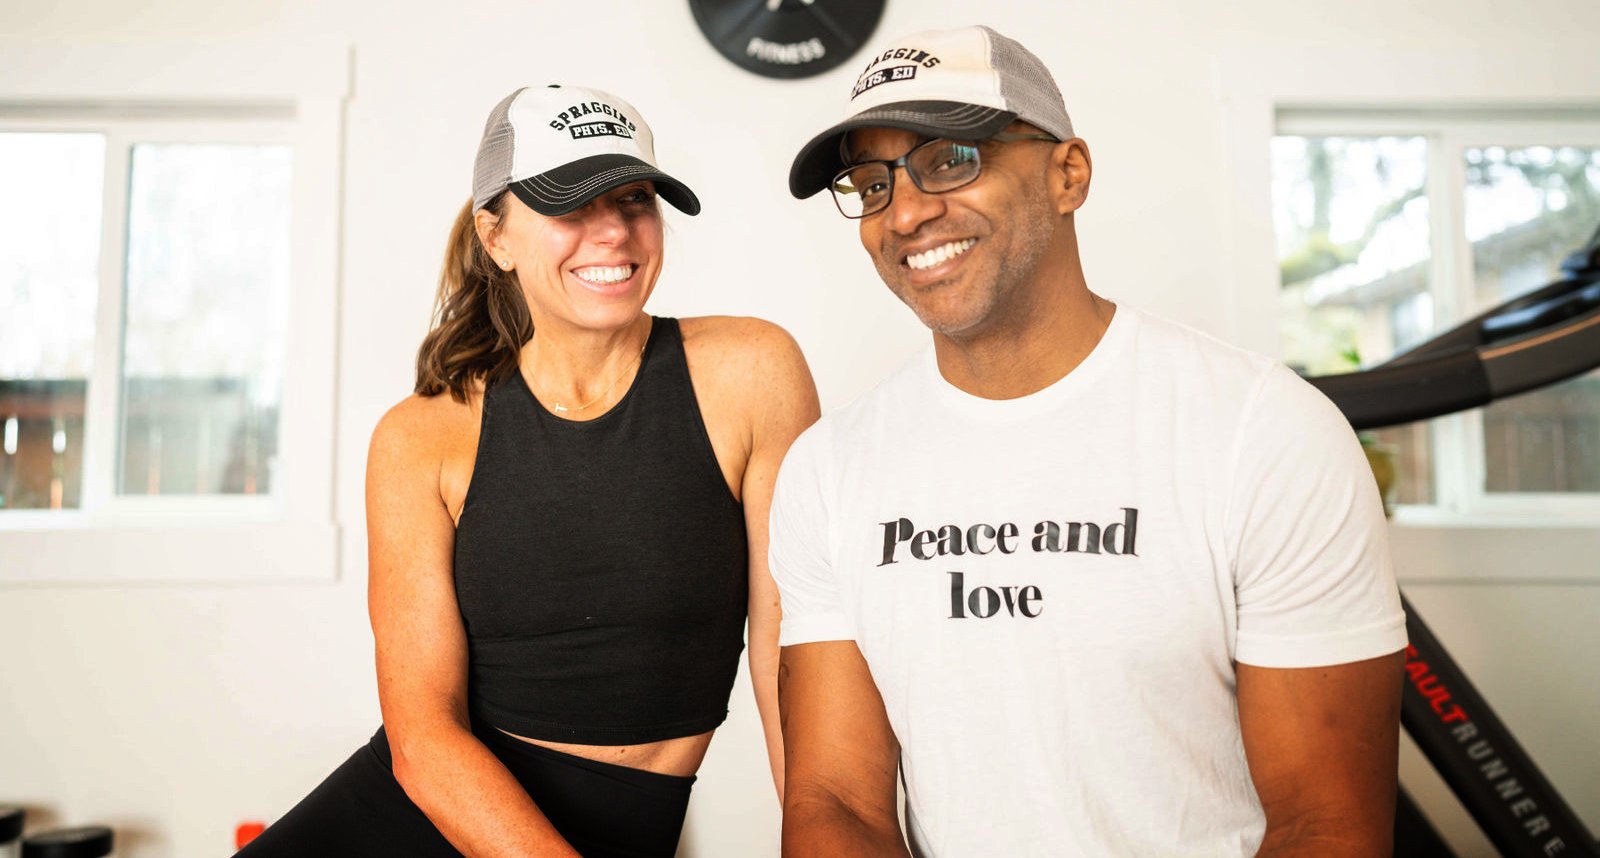   A Neighborhood Fitness Studio   Where encouragement sparks lasting change   See Reviews  